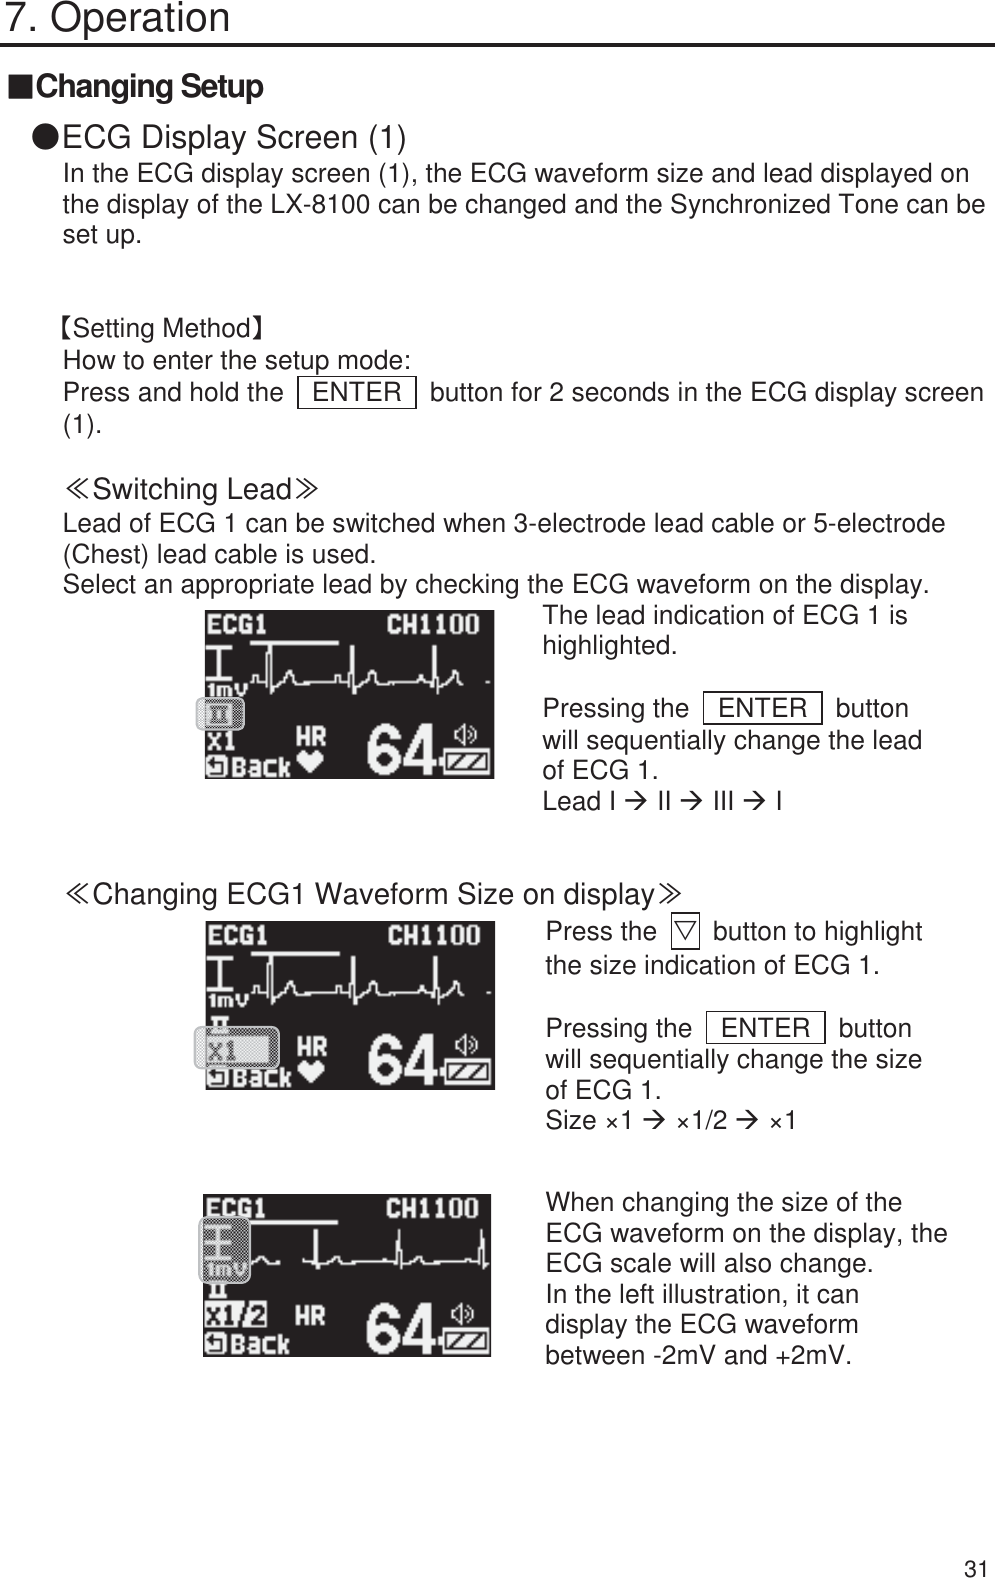  31 7. Operation 䕔Changing Setup 䖃ECG Display Screen (1) In the ECG display screen (1), the ECG waveform size and lead displayed on the display of the LX-8100 can be changed and the Synchronized Tone can be set up.   ࠙Setting Methodࠚ How to enter the setup mode: Press and hold the    ENTER    button for 2 seconds in the ECG display screen (1).  䍾Switching Lead䍿 Lead of ECG 1 can be switched when 3-electrode lead cable or 5-electrode (Chest) lead cable is used. Select an appropriate lead by checking the ECG waveform on the display.         The lead indication of ECG 1 is highlighted.  Pressing the  ENTER  button will sequentially change the lead of ECG 1. Lead I Æ II Æ III Æ I  䍾Changing ECG1 Waveform Size on display䍿         Press the  ť  button to highlight the size indication of ECG 1.    Pressing the  ENTER  button will sequentially change the size of ECG 1. Size ×1 Æ ×1/2 Æ ×1         When changing the size of the ECG waveform on the display, the ECG scale will also change. In the left illustration, it can display the ECG waveform between -2mV and +2mV.       